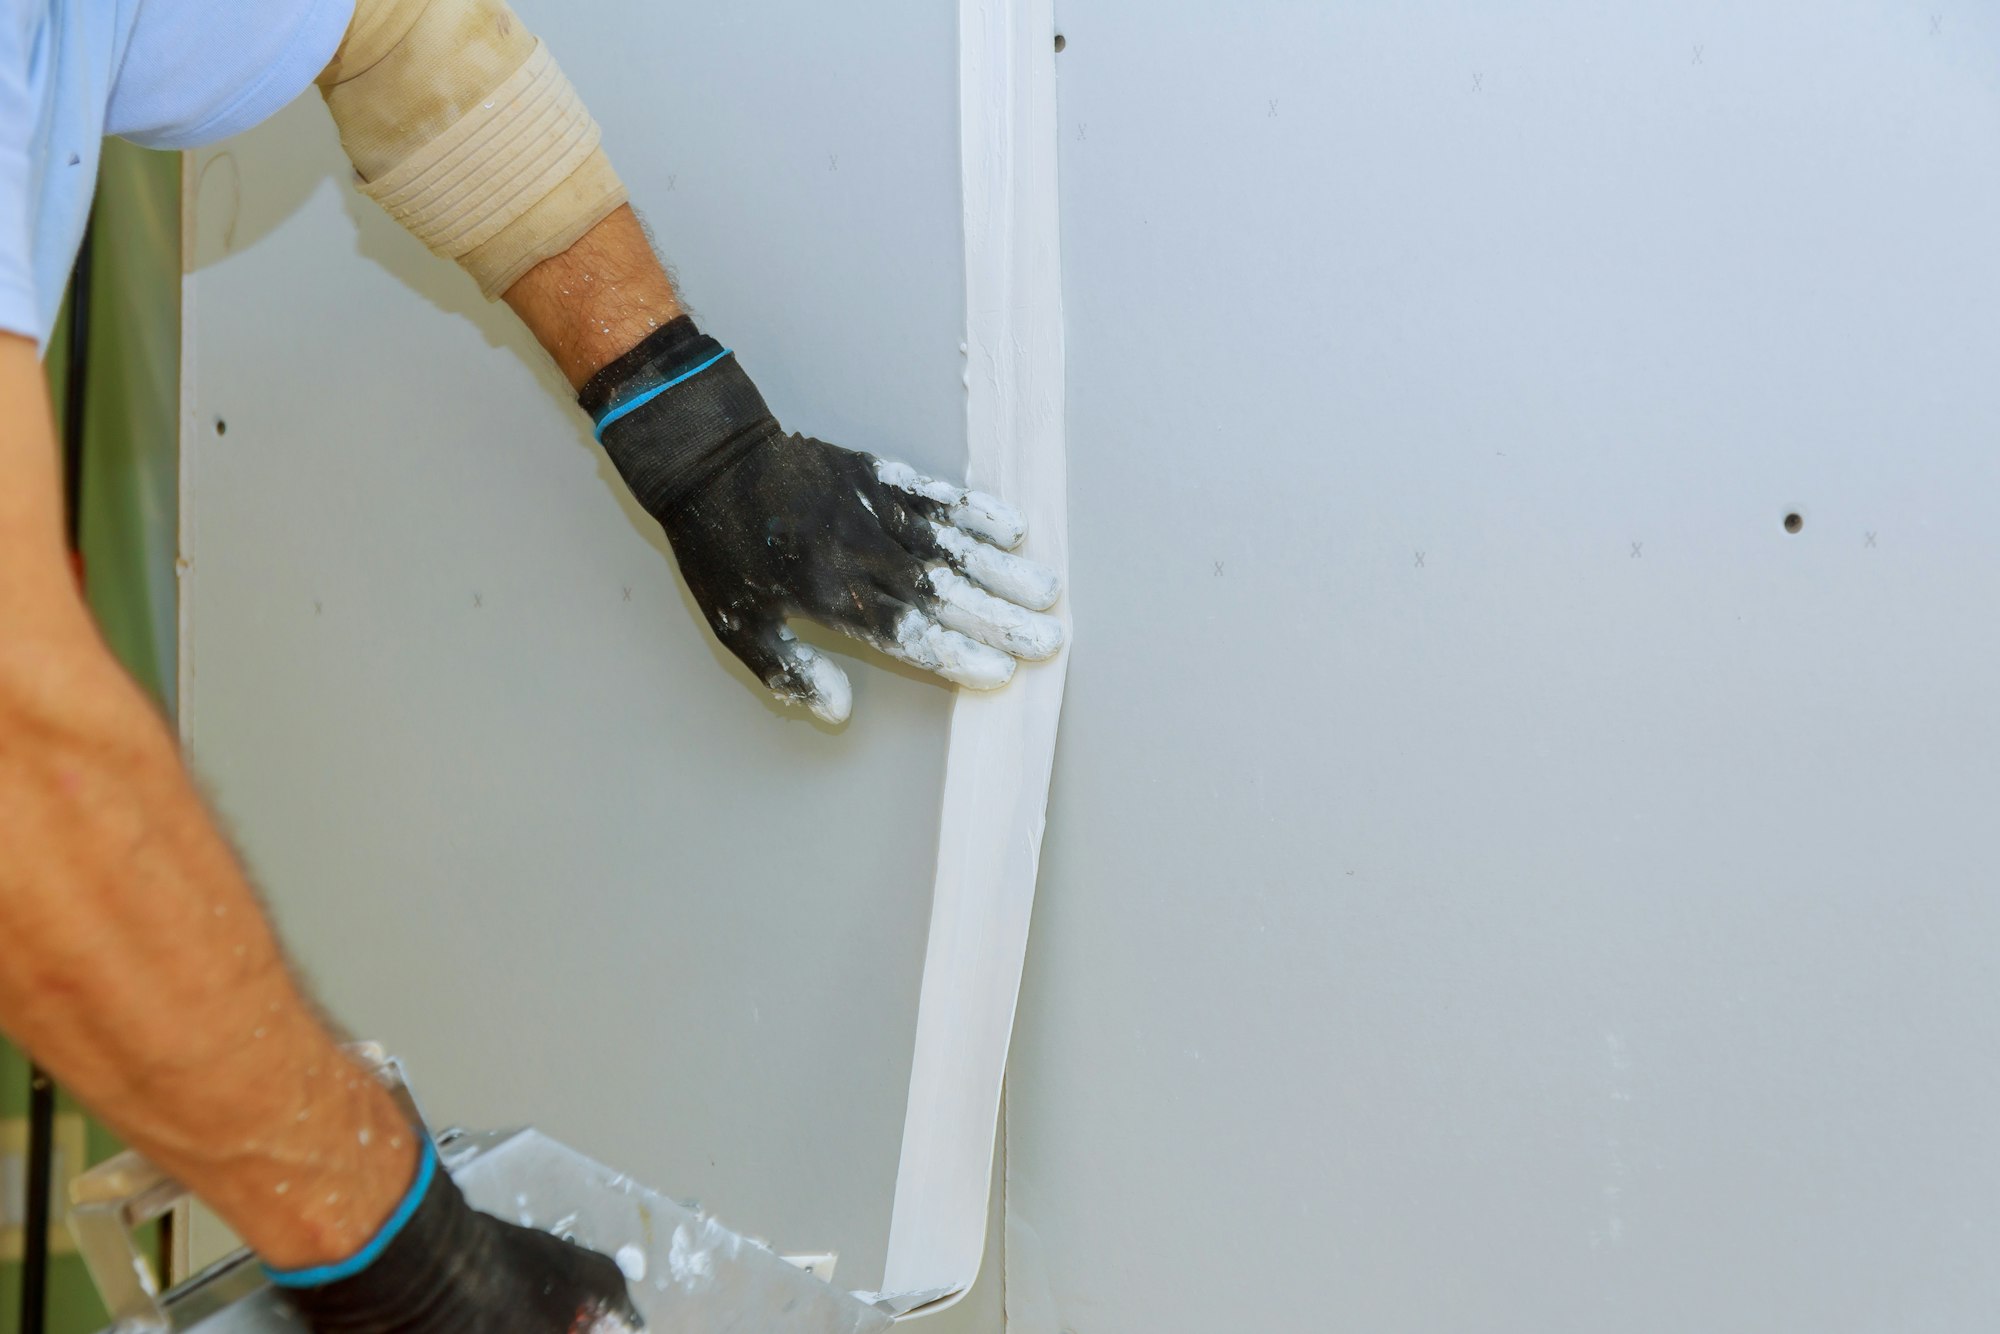 Repair work and construction worker in overalls plastering a wall with finishing putty using a putty